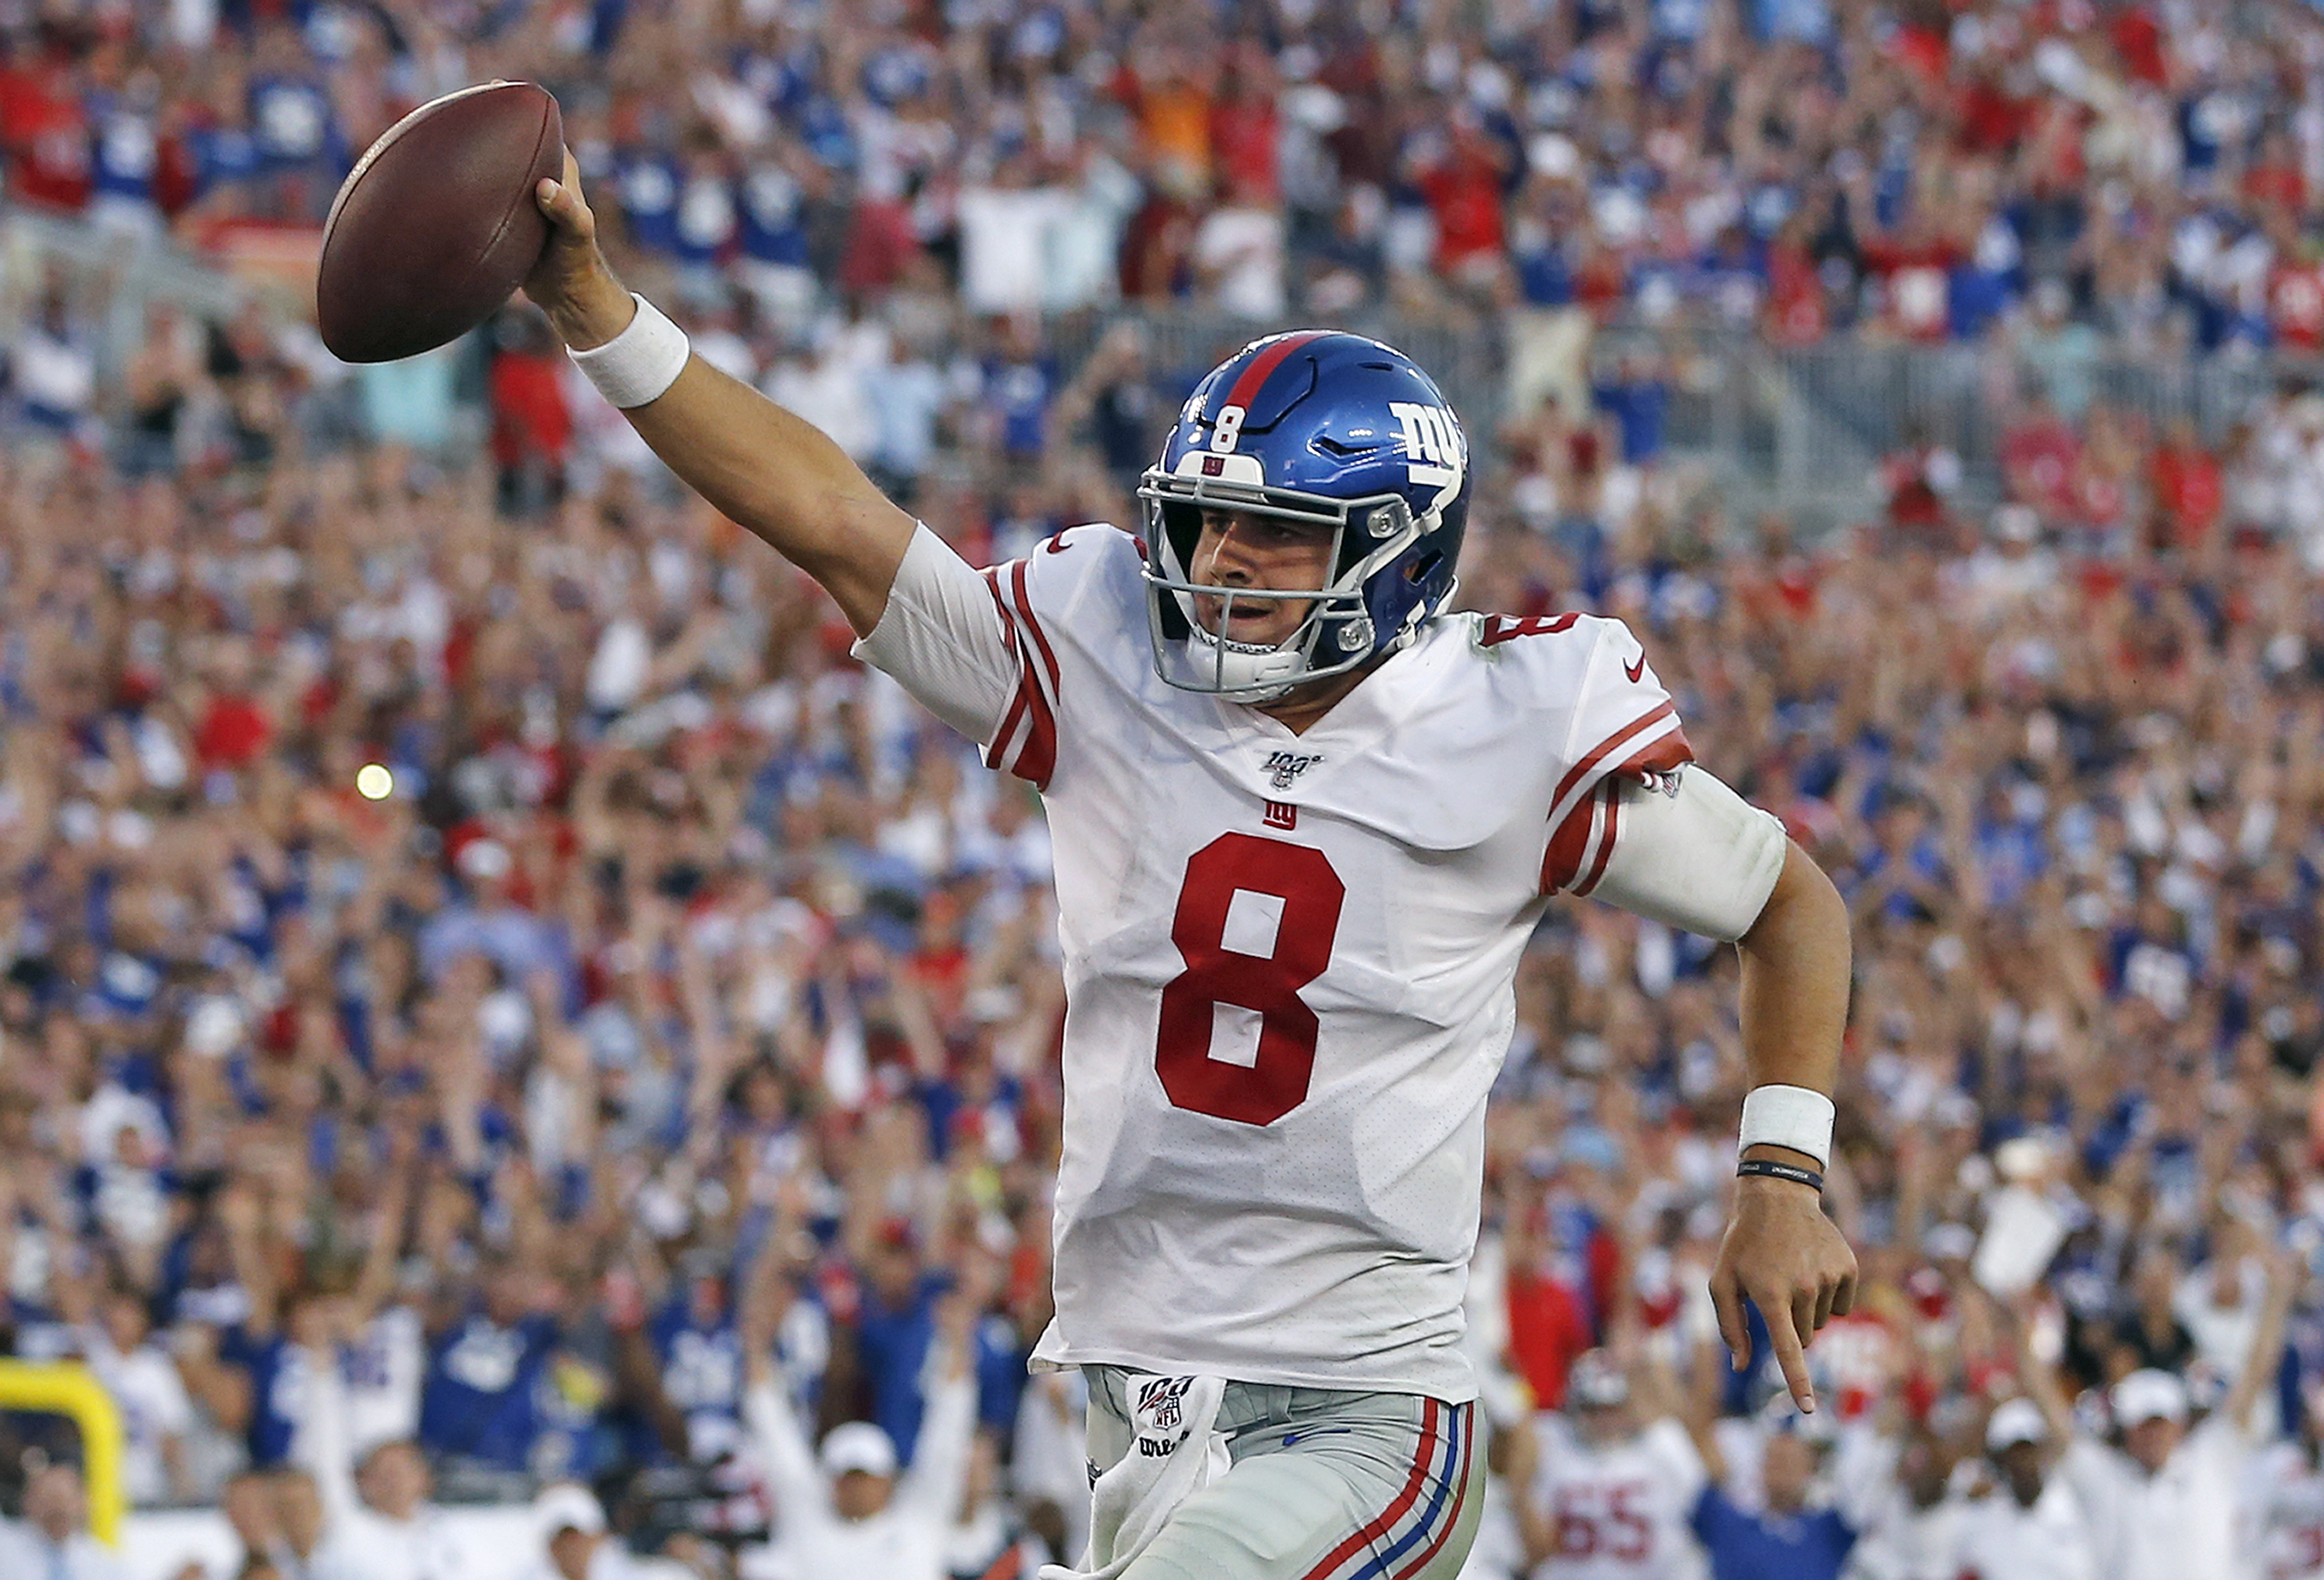 Jones lives up to hype in Giants debut as quarterback